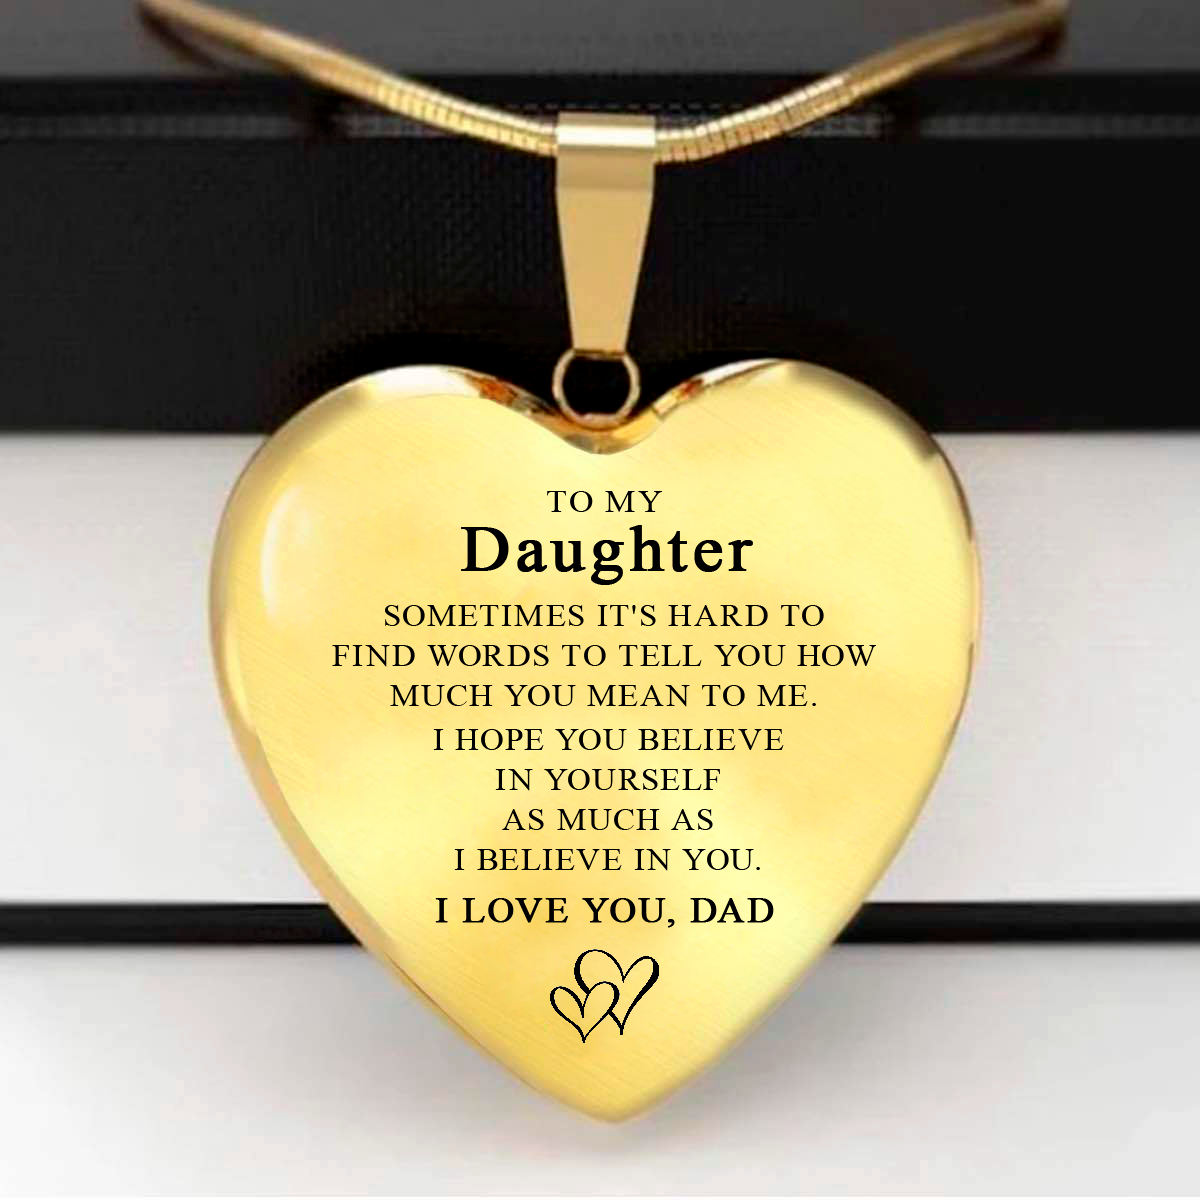 To my Daughter - Feel my love, Dad